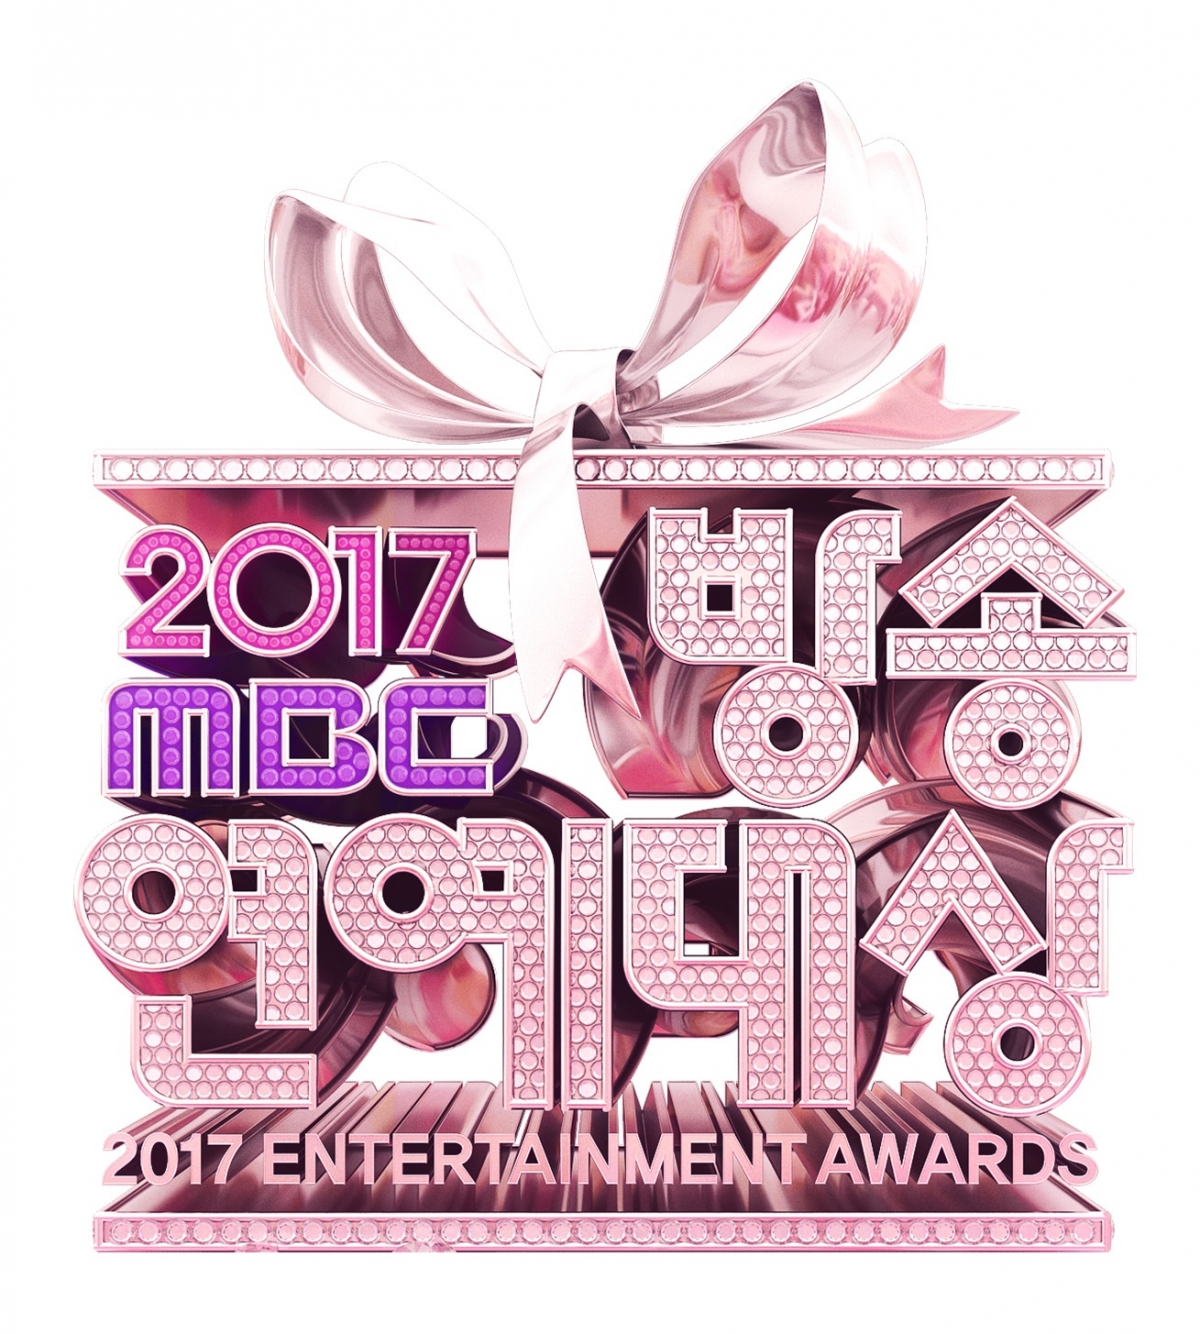 MBC Entertainment Awards 2017 live stream Where to watch annual award